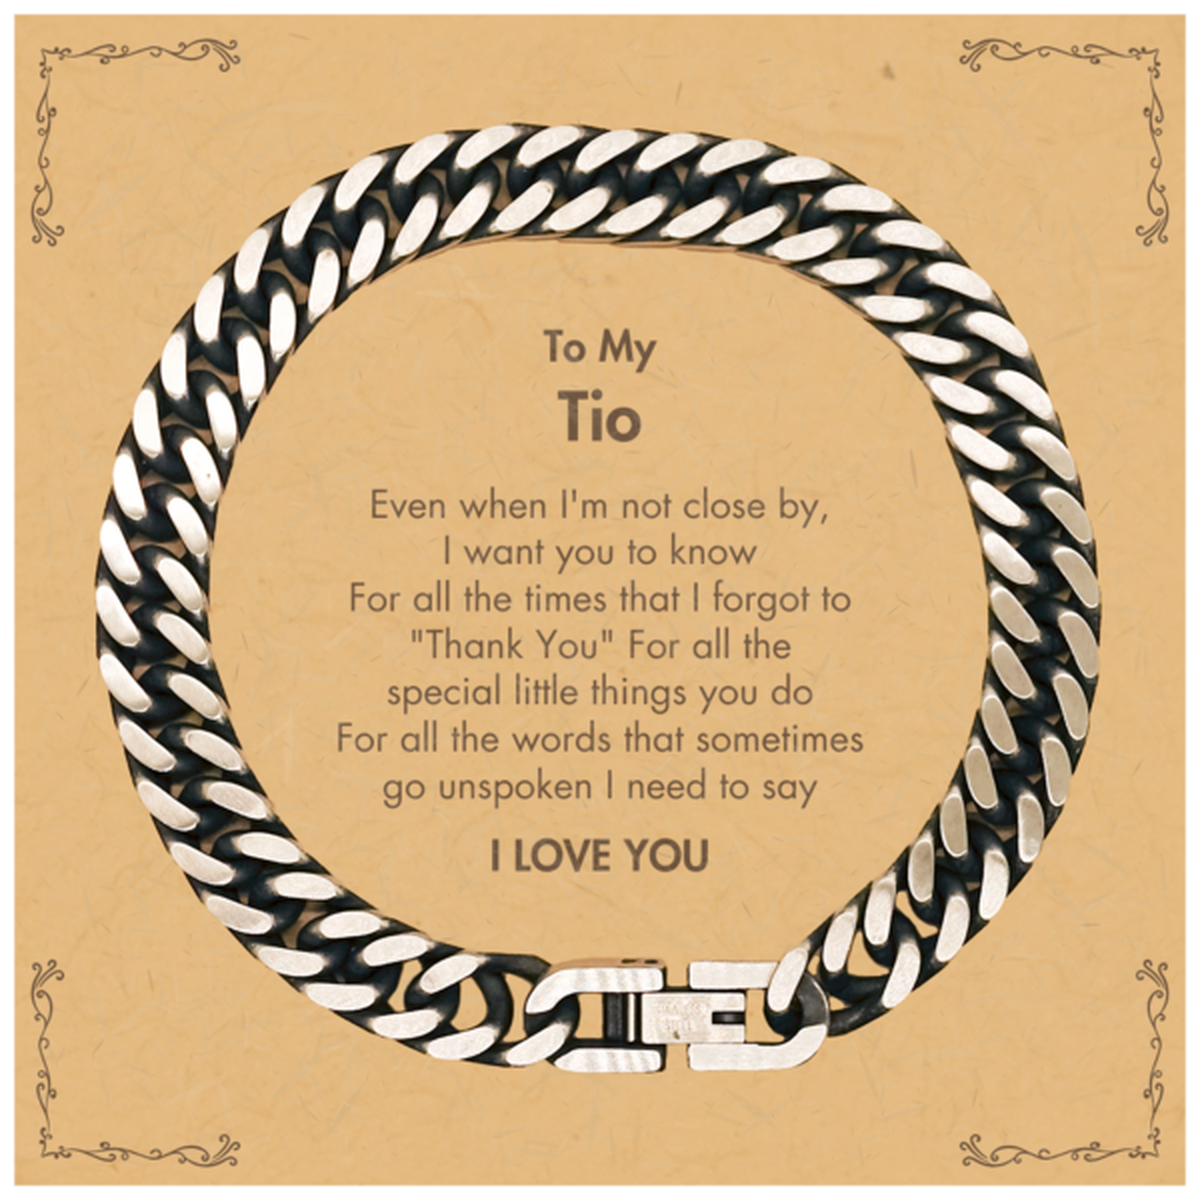 Thank You Gifts for Tio, Keepsake Cuban Link Chain Bracelet Gifts for Tio Birthday Mother's day Father's Day Tio For all the words That sometimes go unspoken I need to say I LOVE YOU